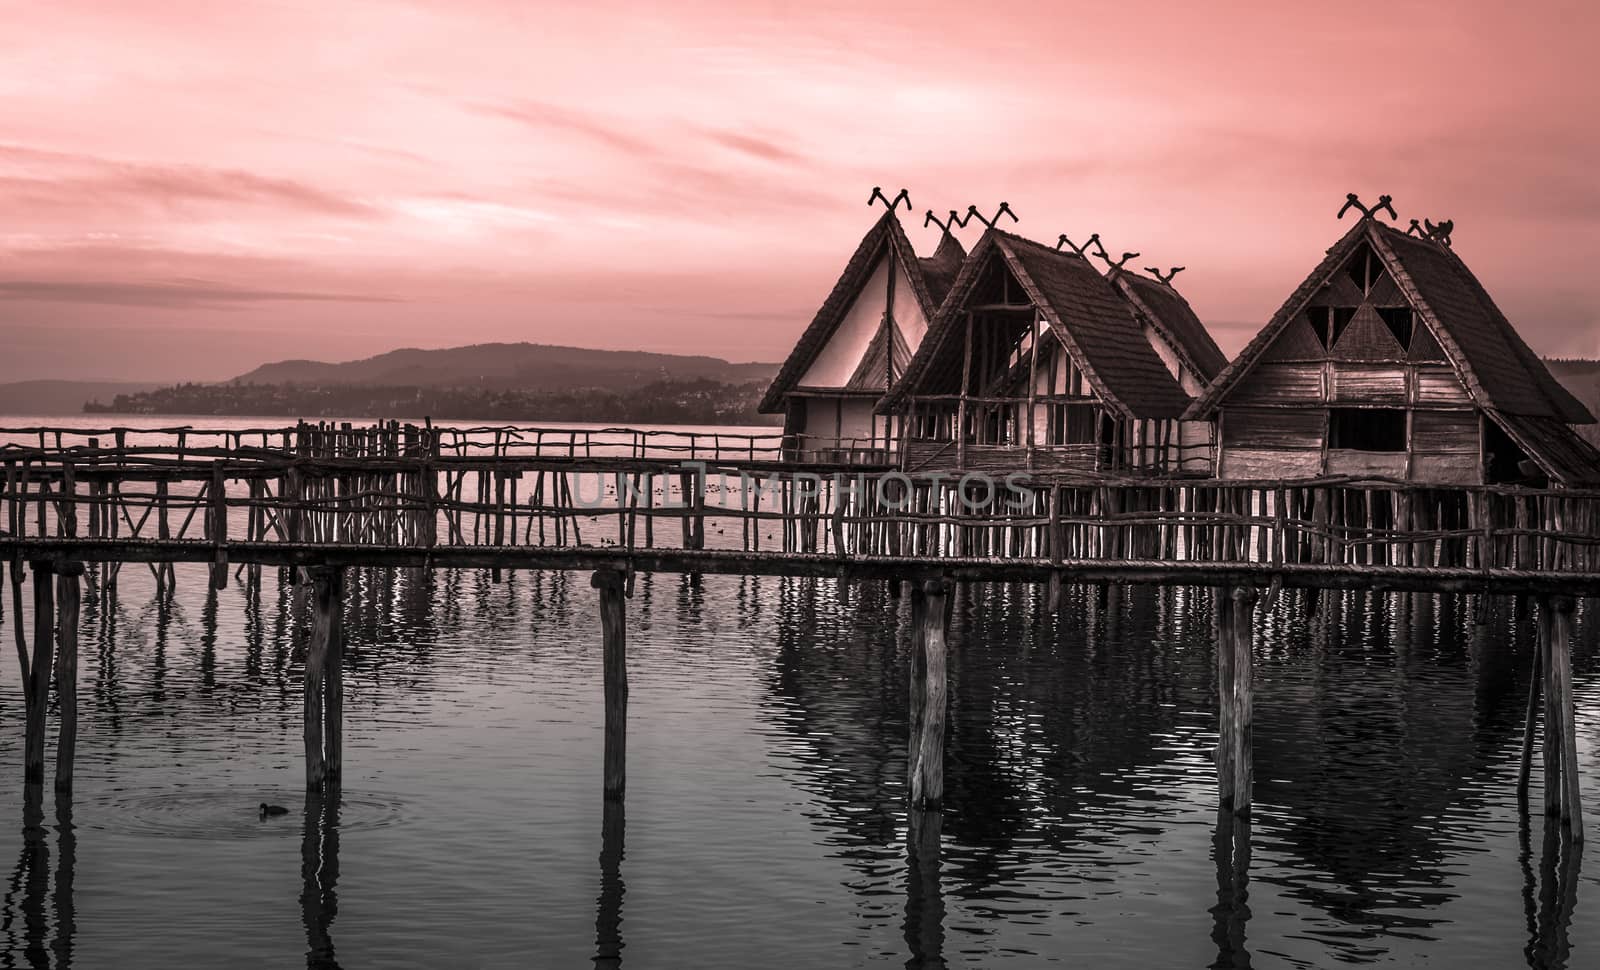 Thatched cottages suspended on stilts over lake by YesPhotographers